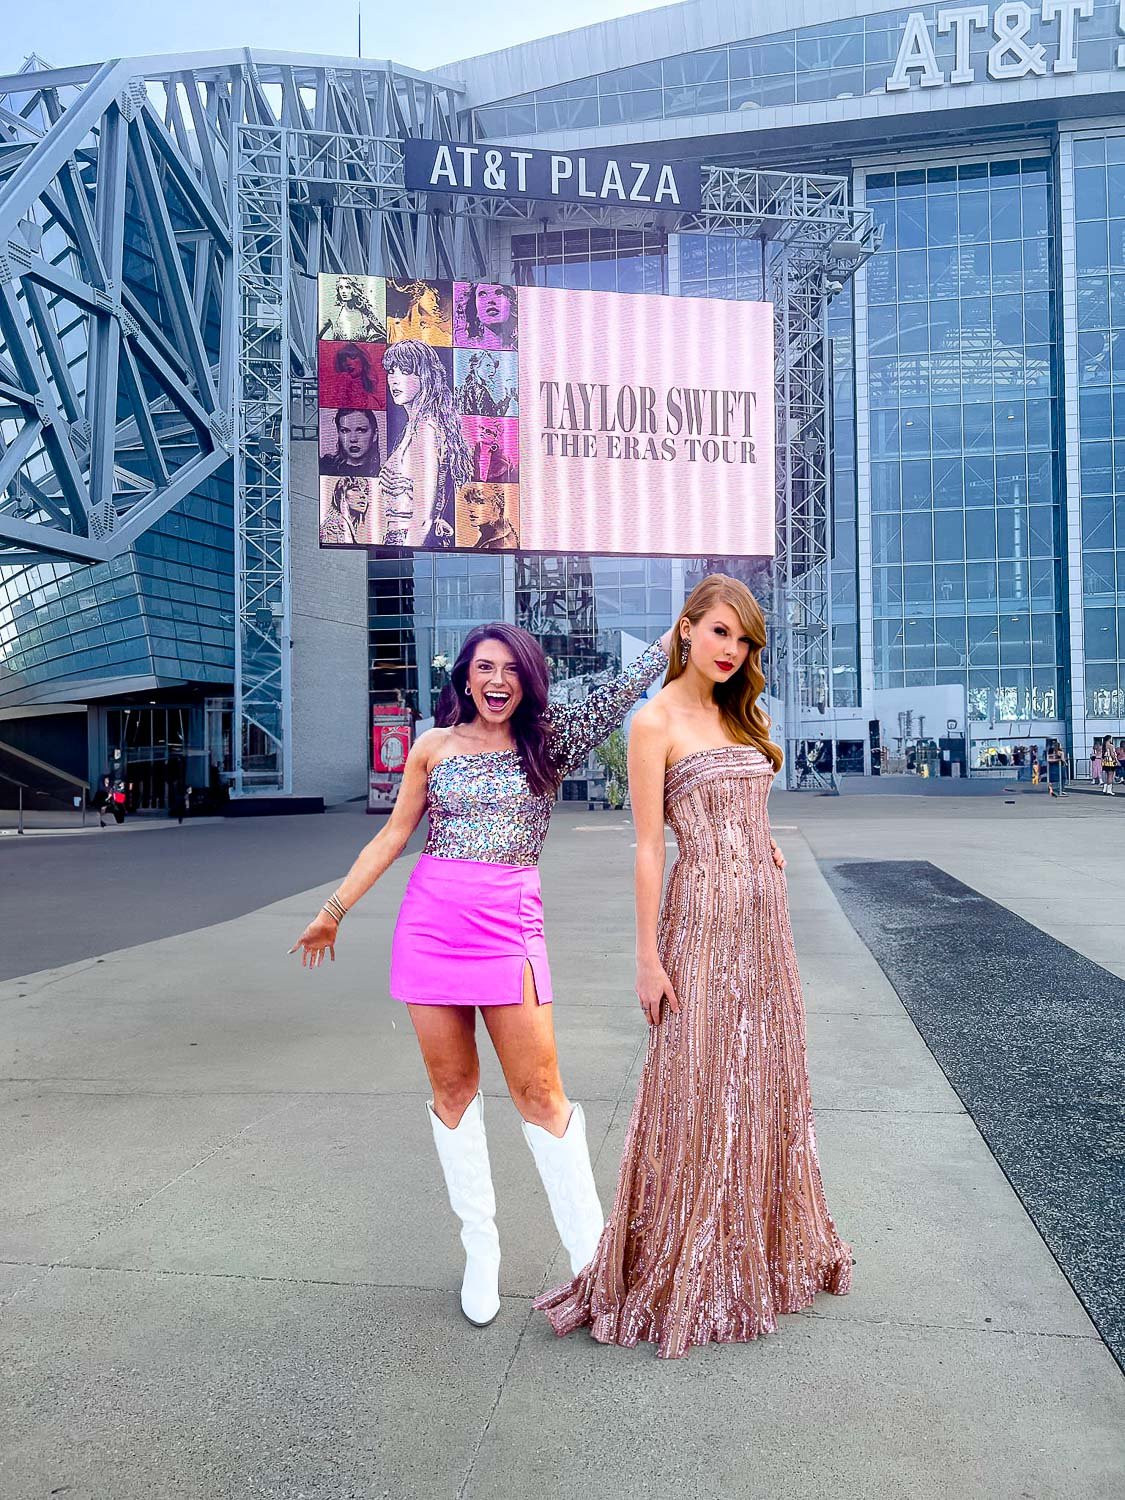 A young woman posing outside of a stadium with Taylor Swift